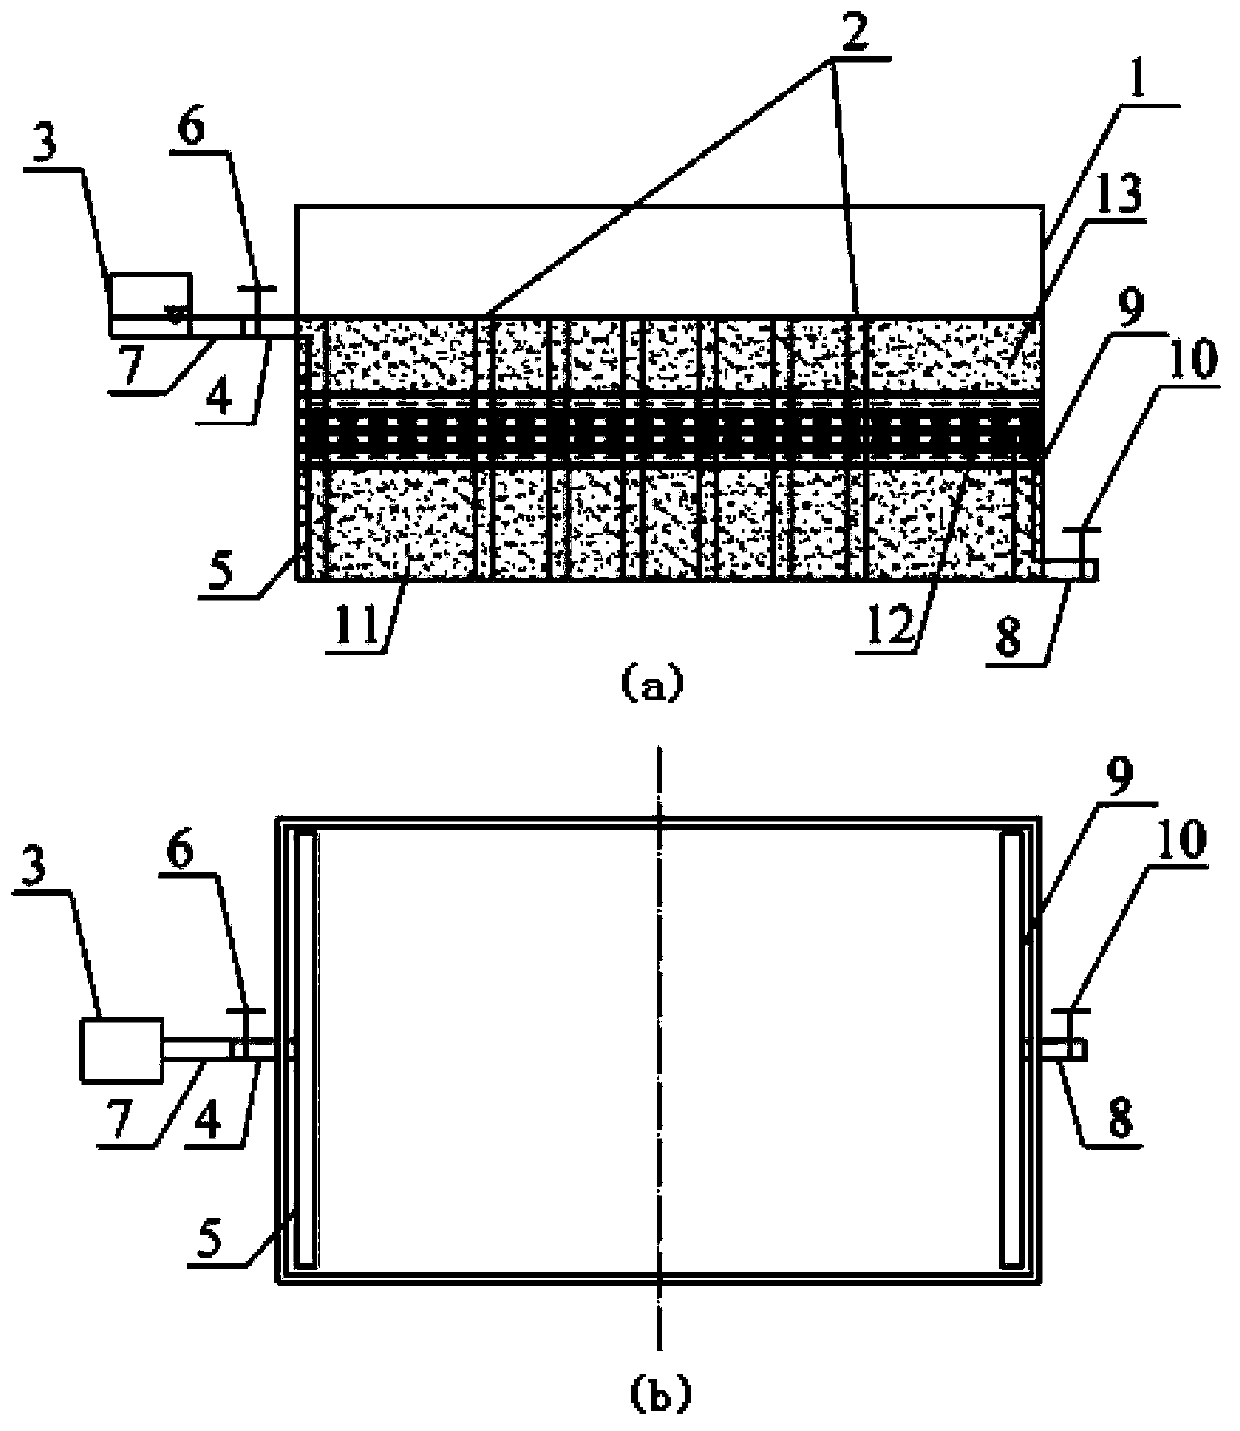 Laboratory simulation test method for researching underground water seepage obstruction caused by pile foundation